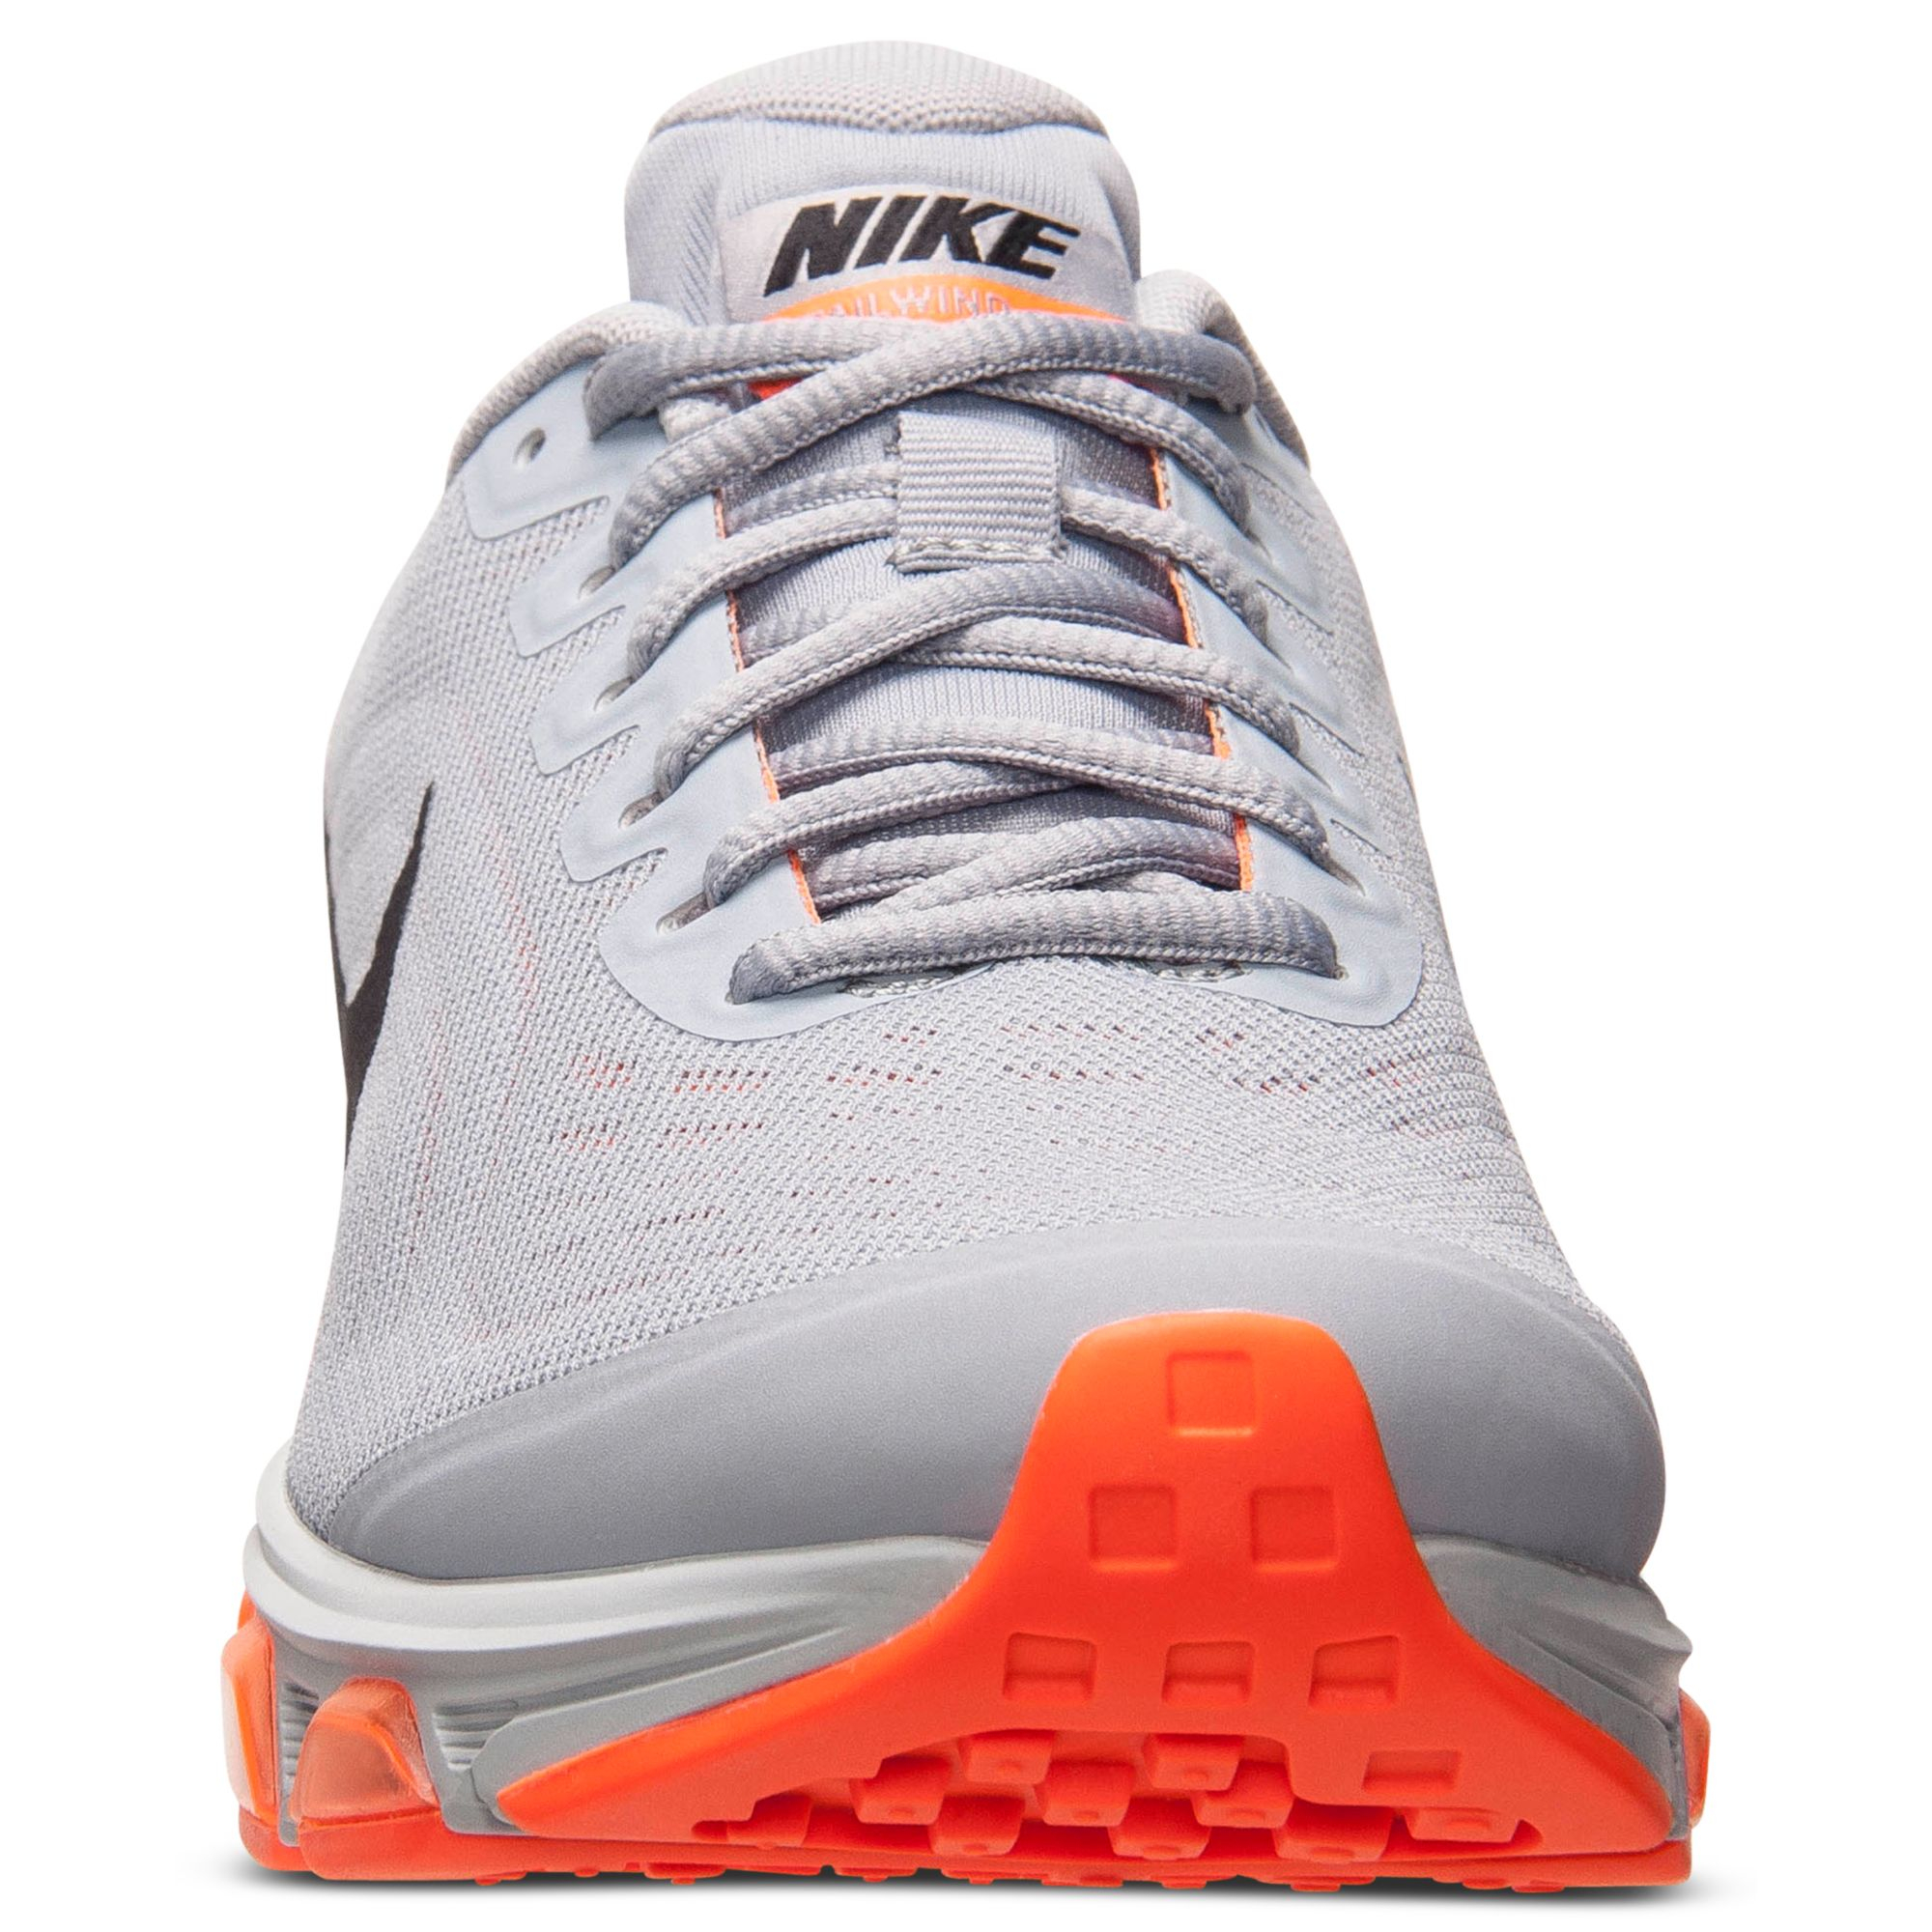 Lyst - Nike Mens Air Max Tailwind 6 Running Sneakers From Finish Line ...